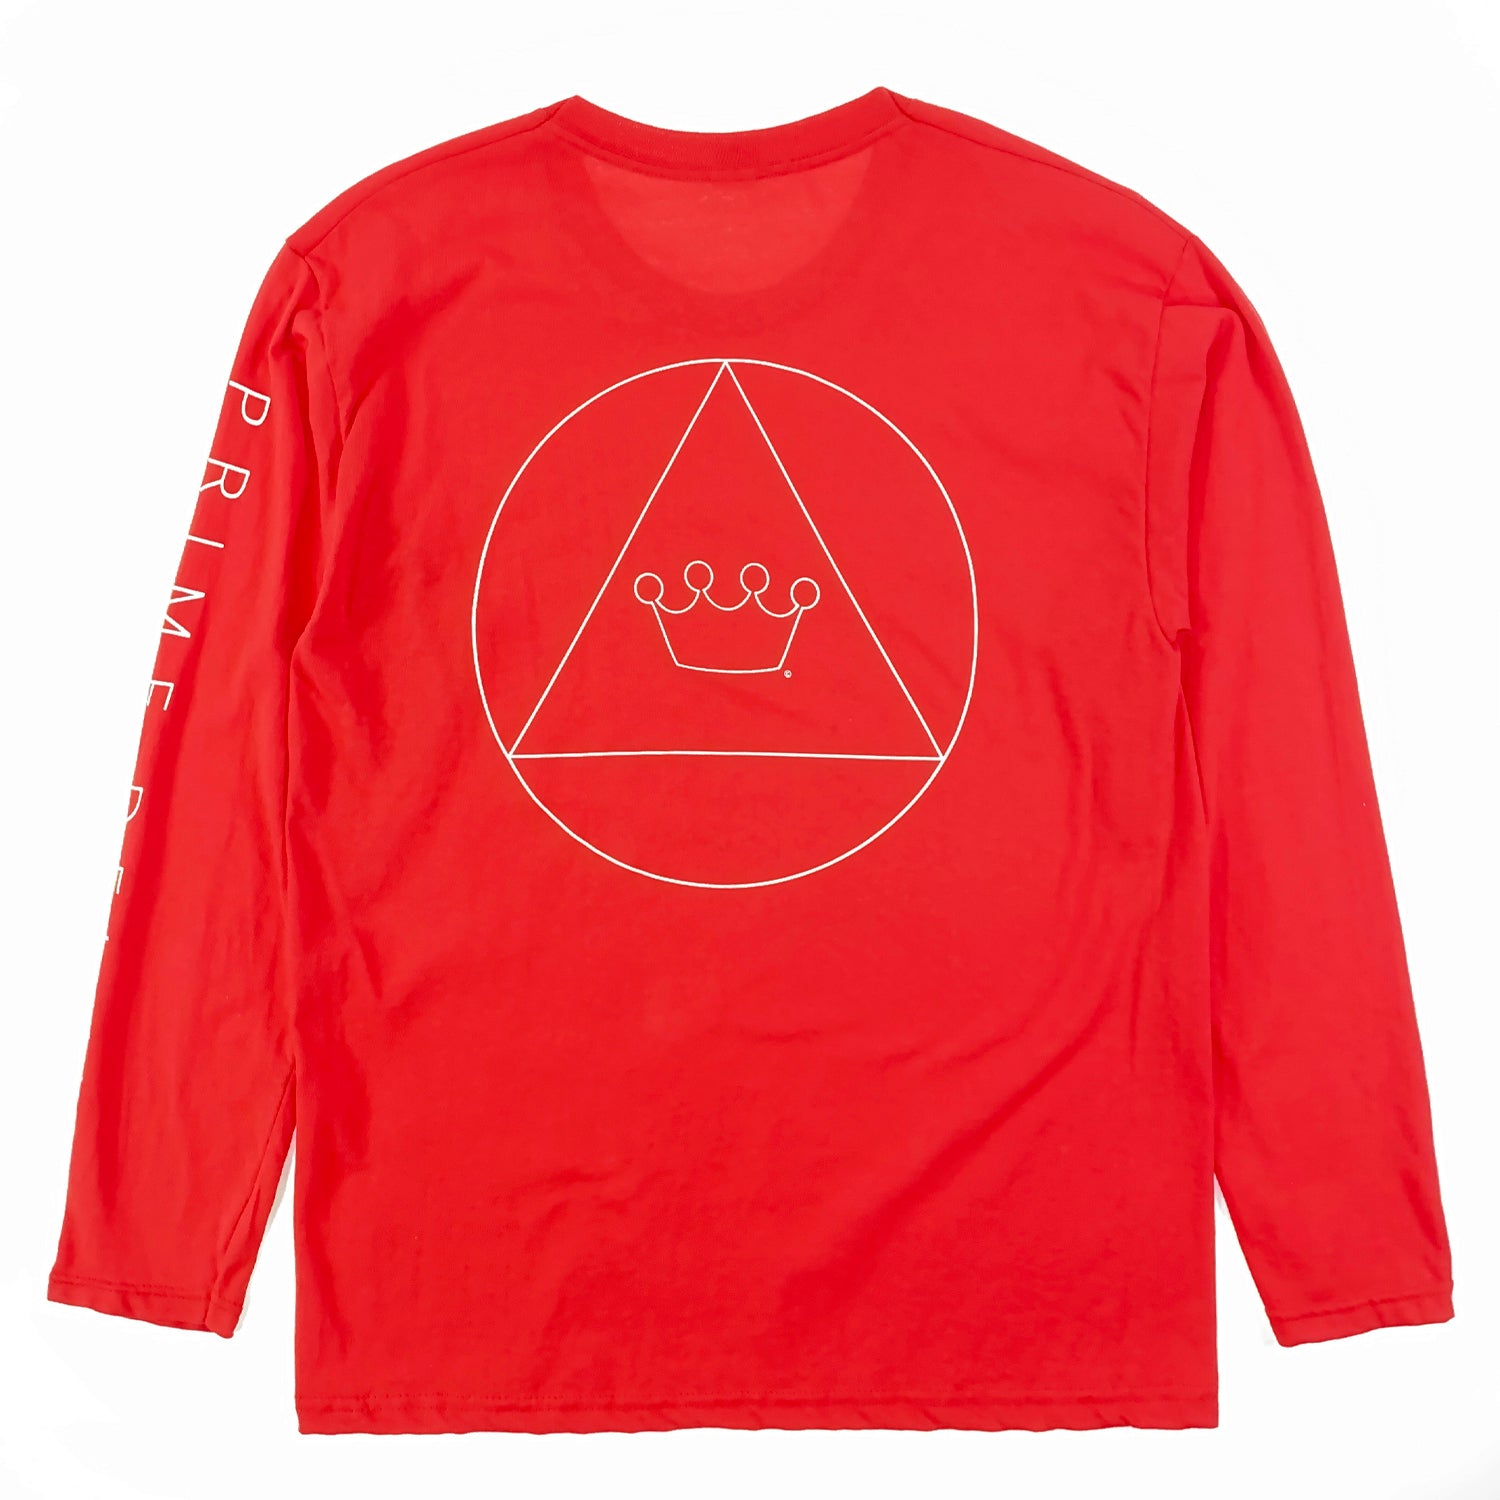 Prime Delux Unity Long Sleeve T Shirt - Red / White - Prime Delux Store